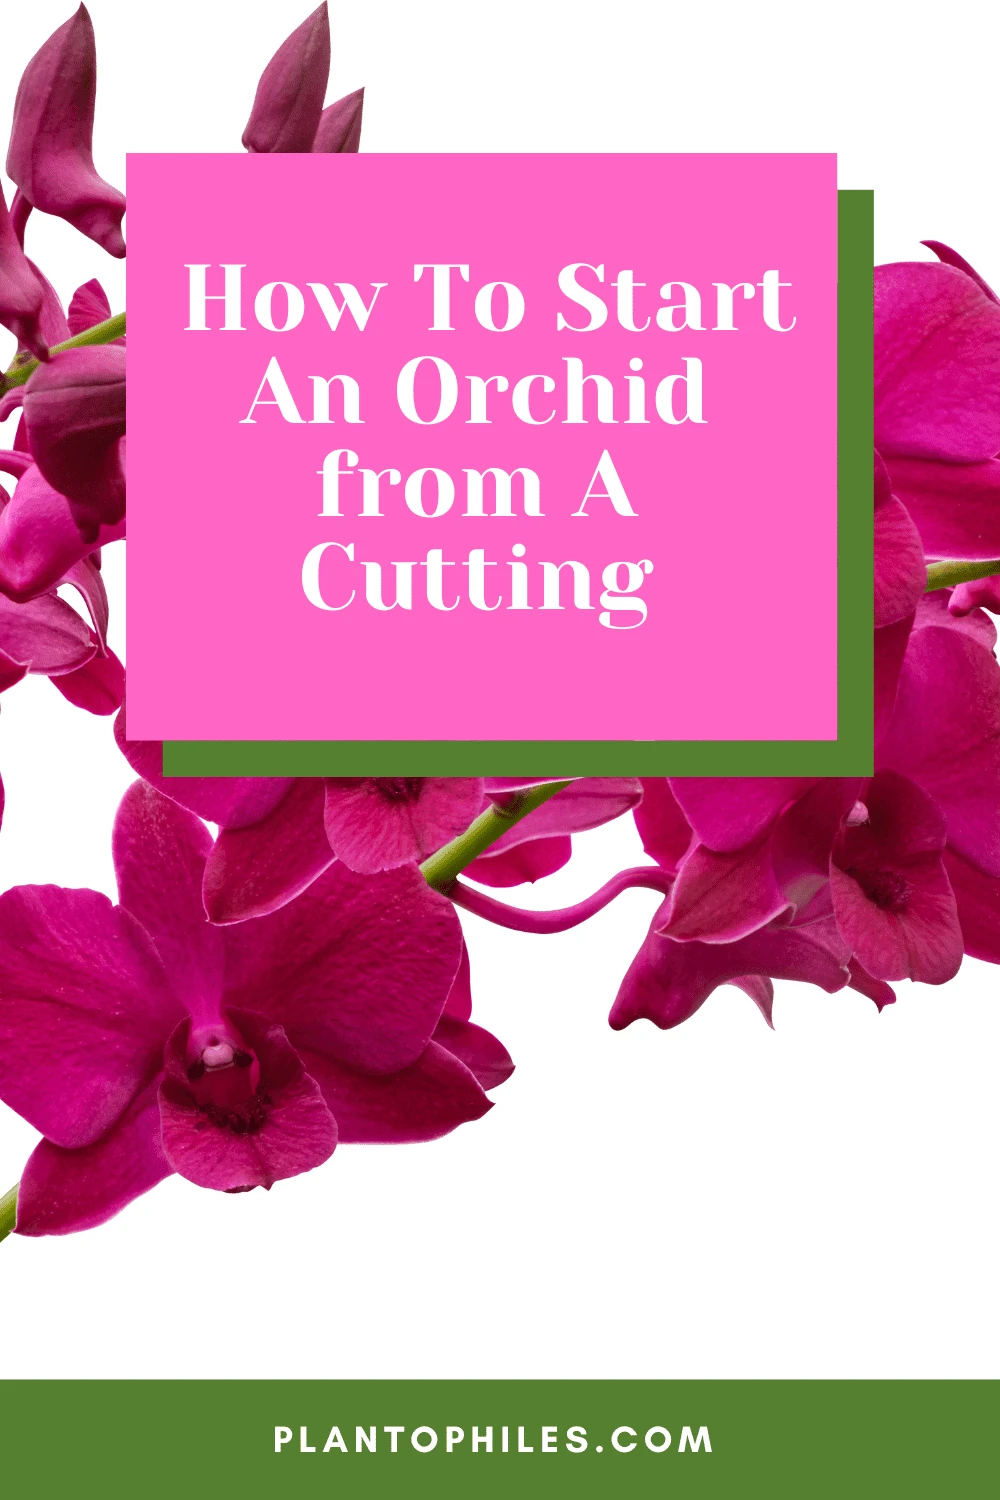 How To Start An Orchid from A Cutting